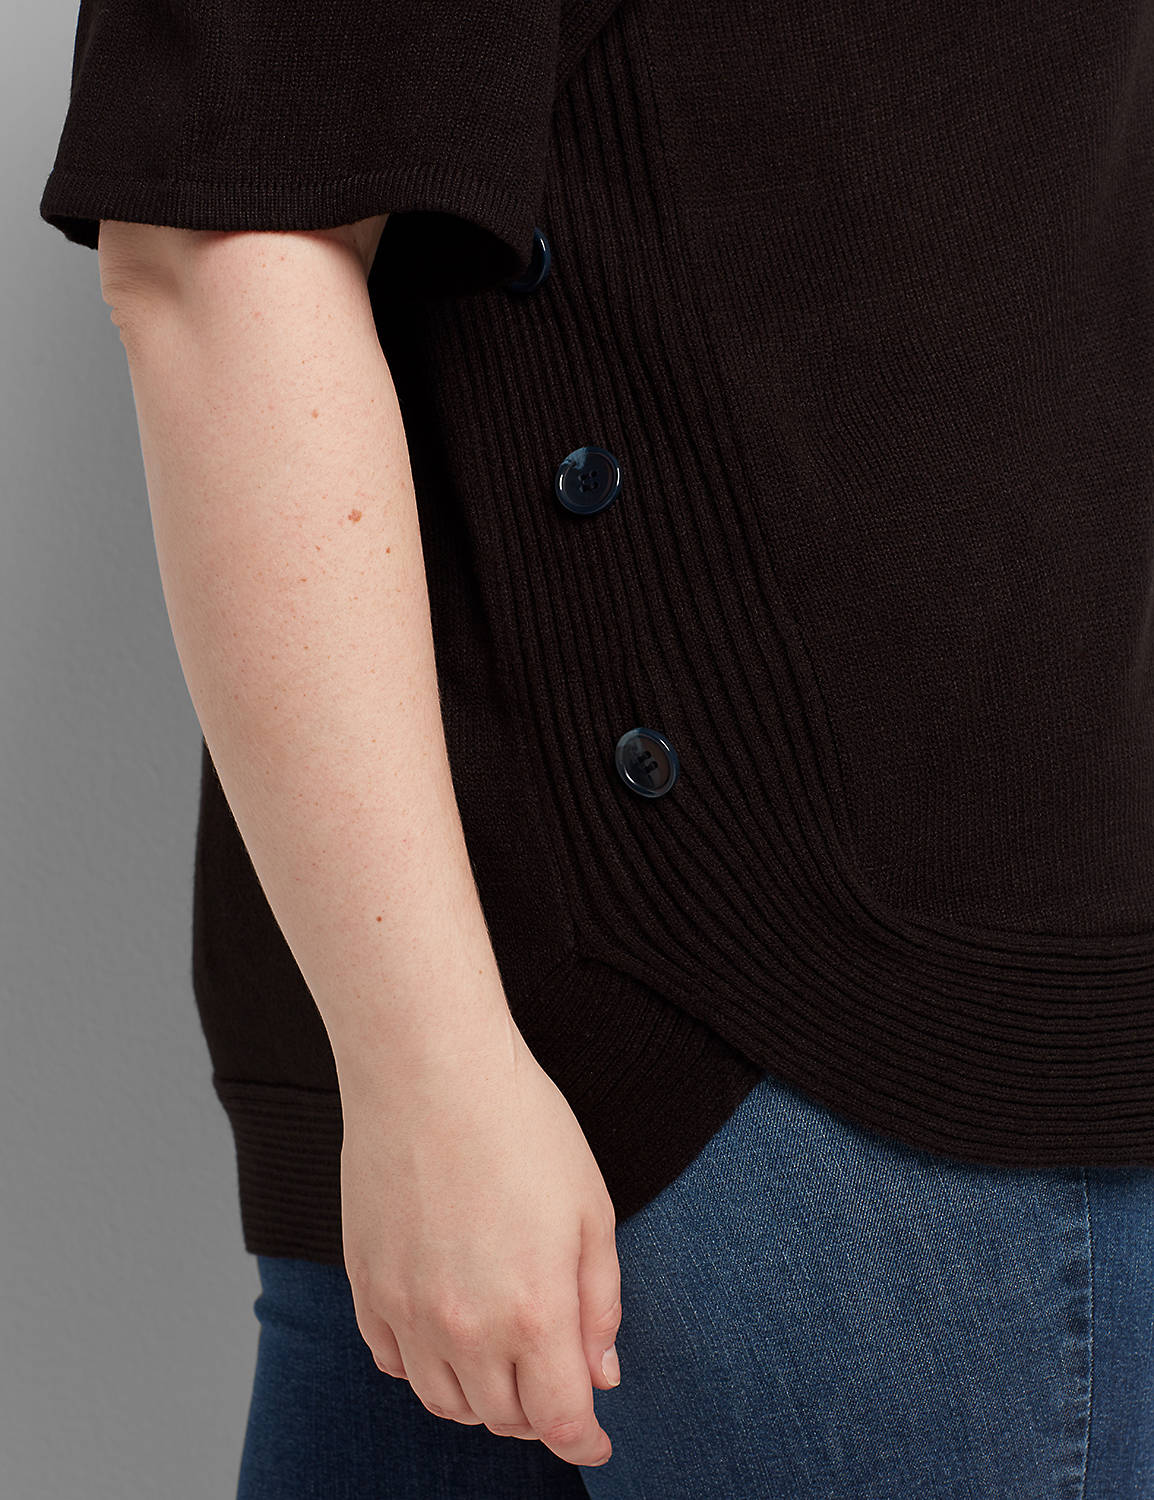 SHORT SLEEVE MOCK NECK BUTTON SIDE PONCHO 1113568:Pitch Black LB 1000322:22/24 Product Image 4